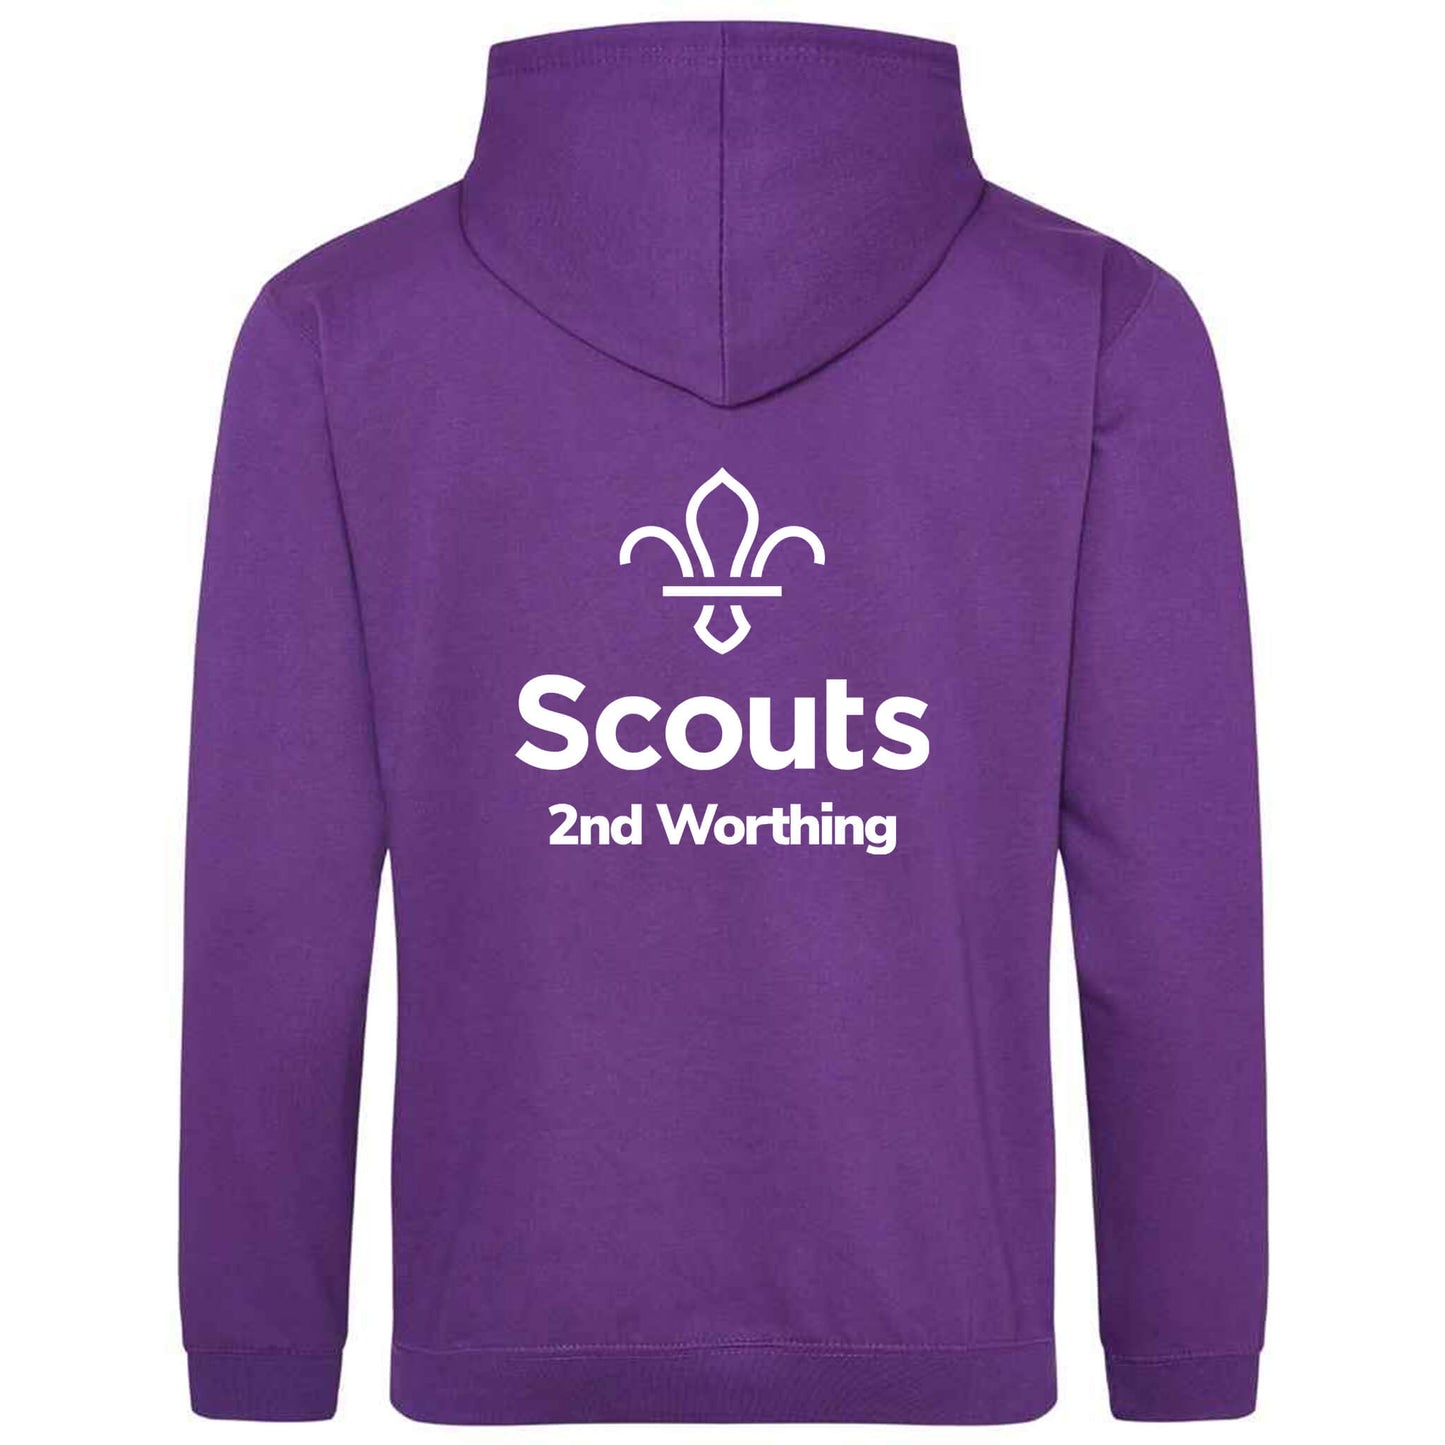 2nd Worthing Scouts Embroidered Hoodie